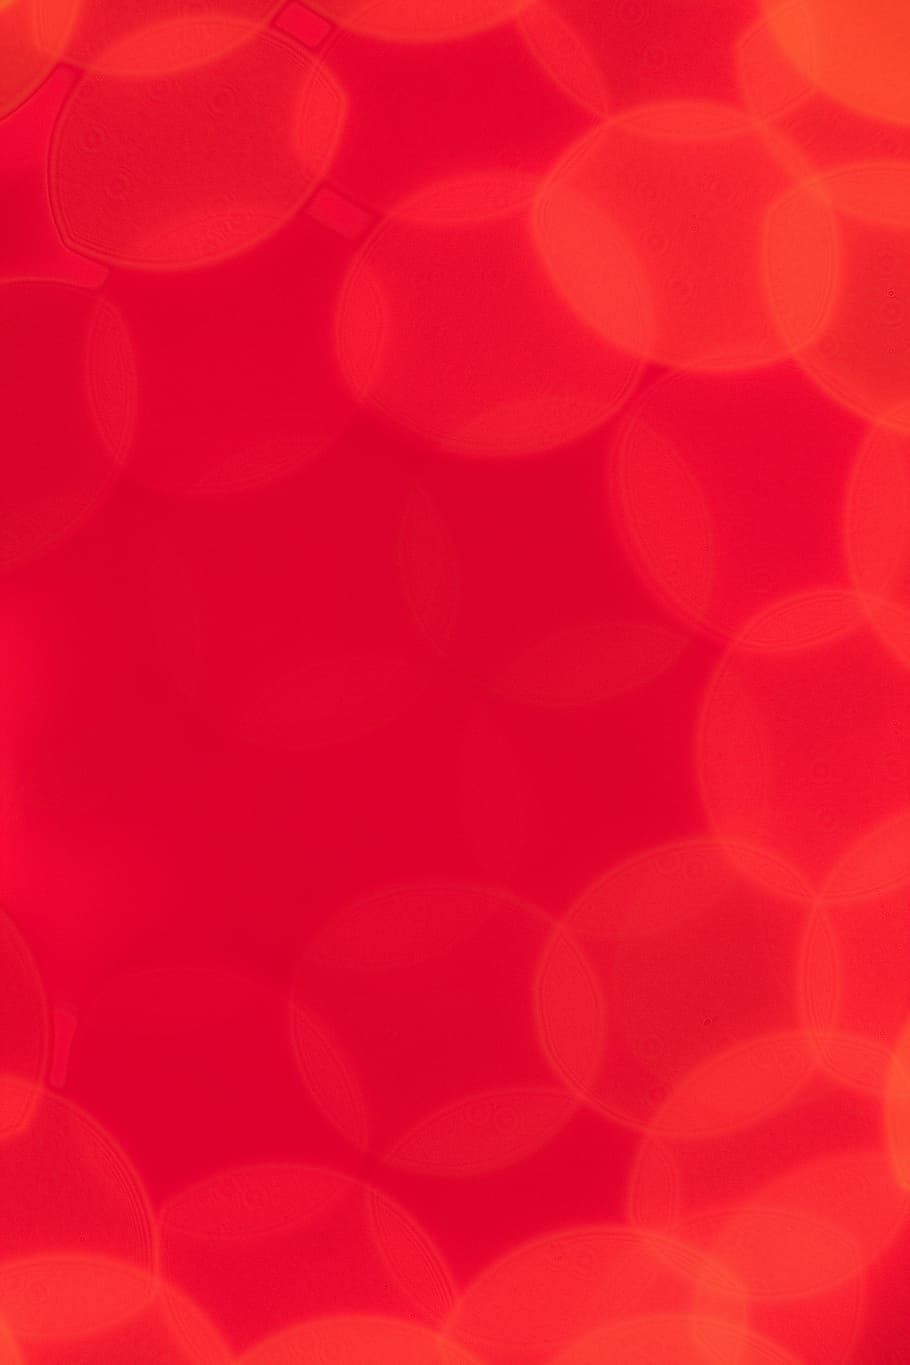 Bokeh, Texture, Sparkle, red, abstract, backgrounds, pattern, defocused, celebration event, full frame